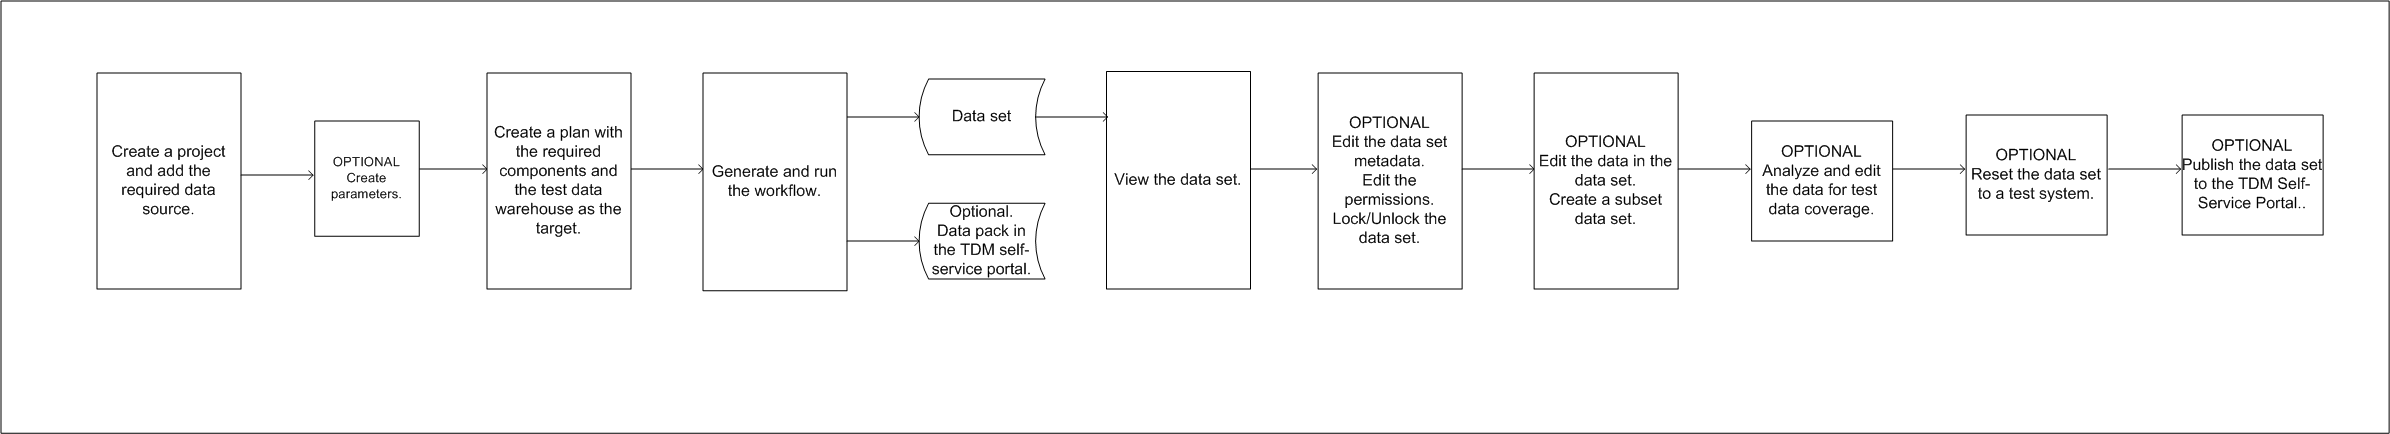 The image shows the tasks that you perform to create a data set and the tasks that you can perfom on a data set in the test data warehouse. 
			 